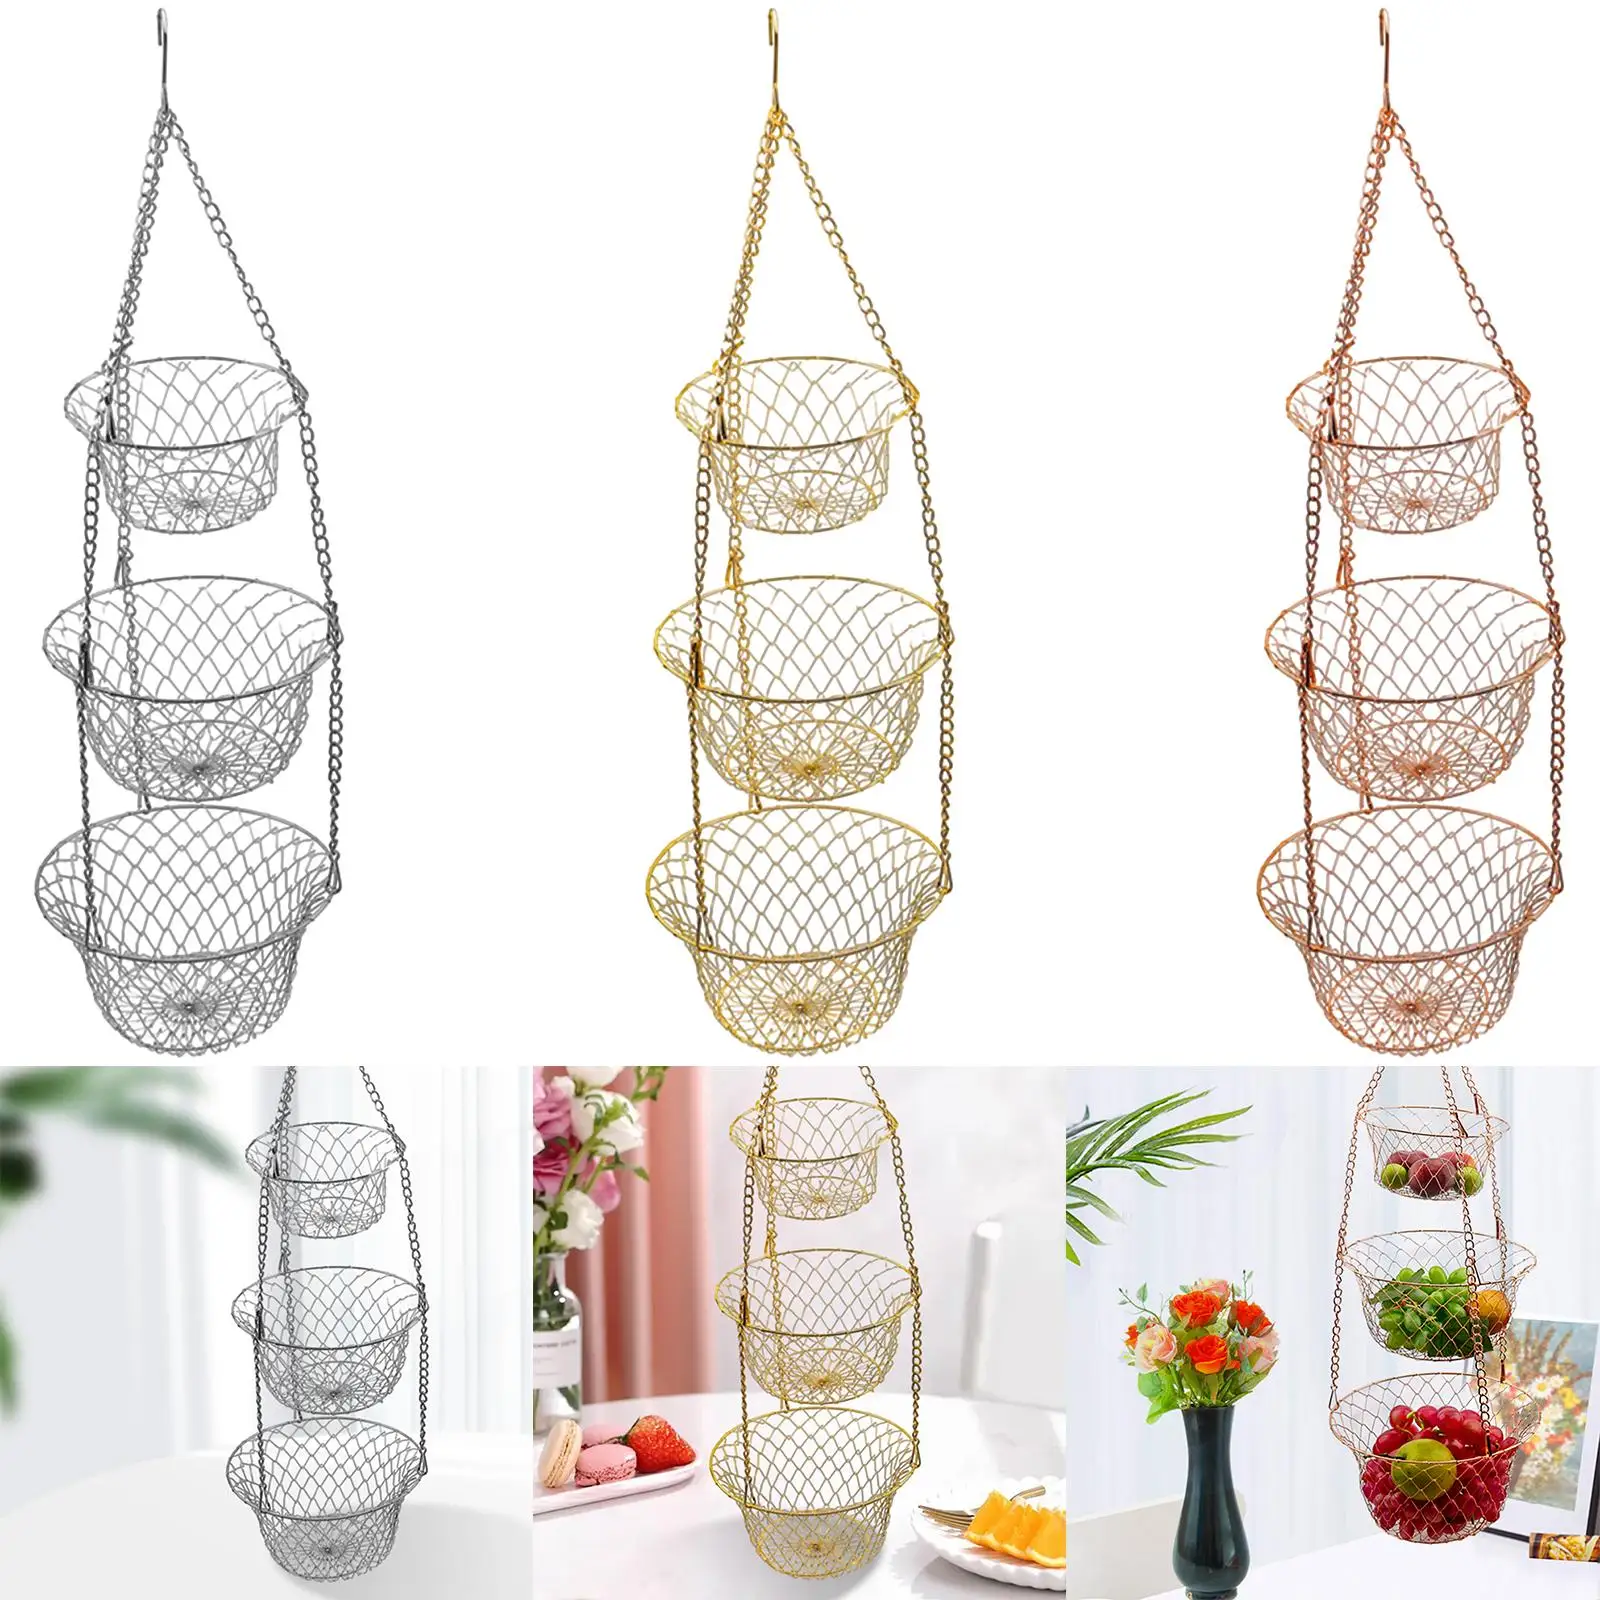 3 Tier Hanging Fruit and Vegetable Basket Heavy Duty Wire Fruit Organizer 3 Tiered Hanging Organizer Basket for Kitchen